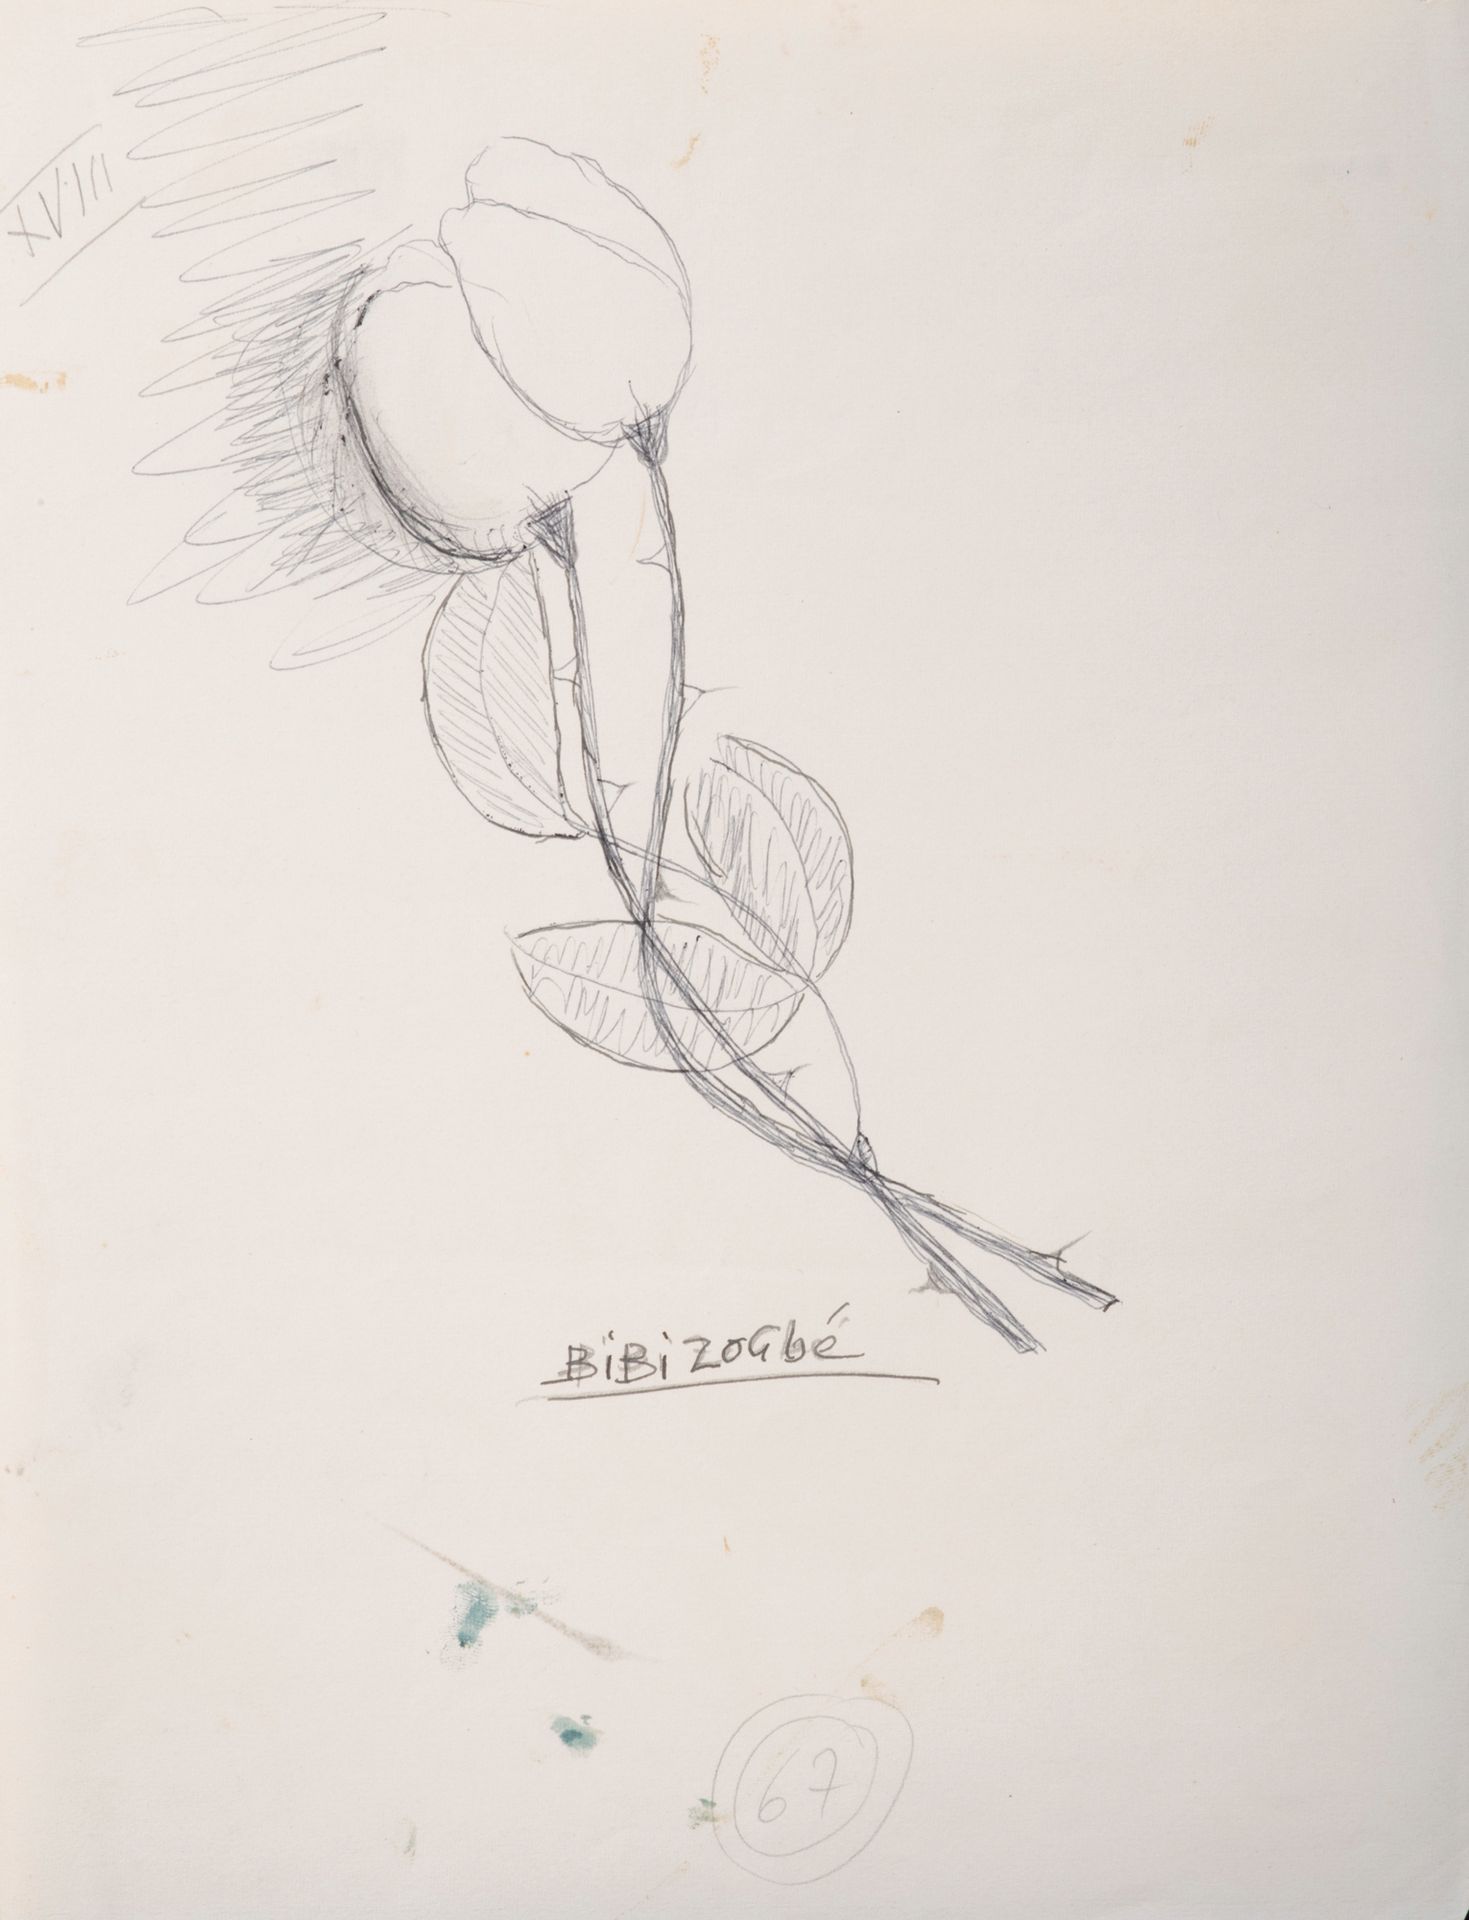 BIBI ZOGBE (1890-1973) Flower
Pencil on paper, signed lower middle, stains, anno&hellip;